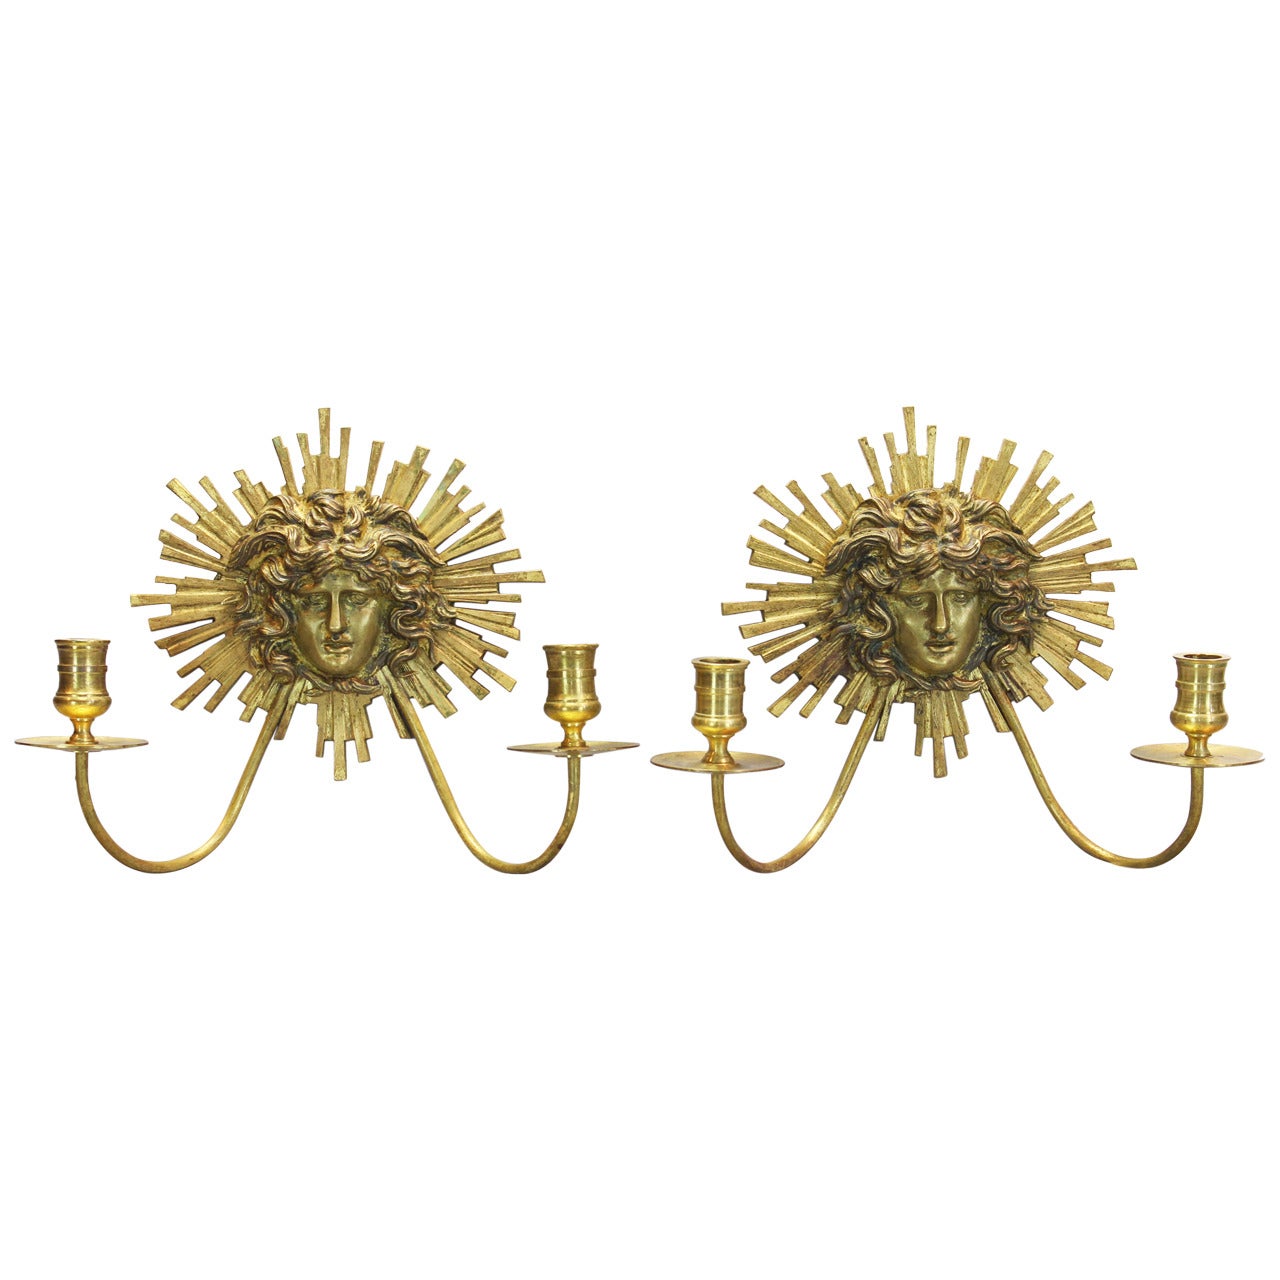 Pair of Neoclassical Gilt Bronze Candle Sconces